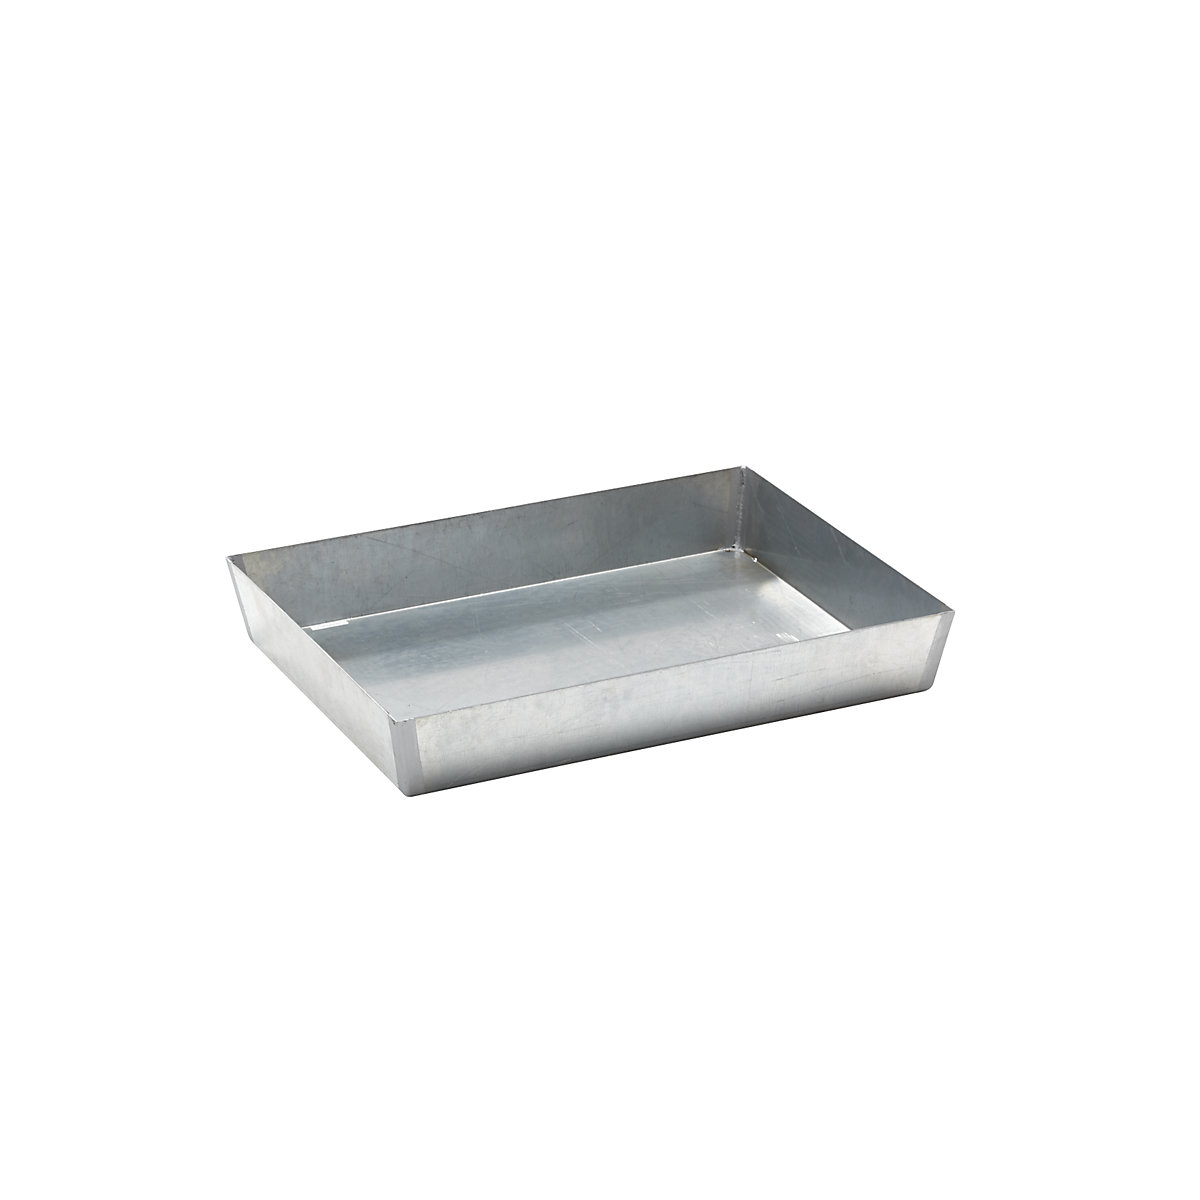 Steel small container pallet tray – eurokraft basic